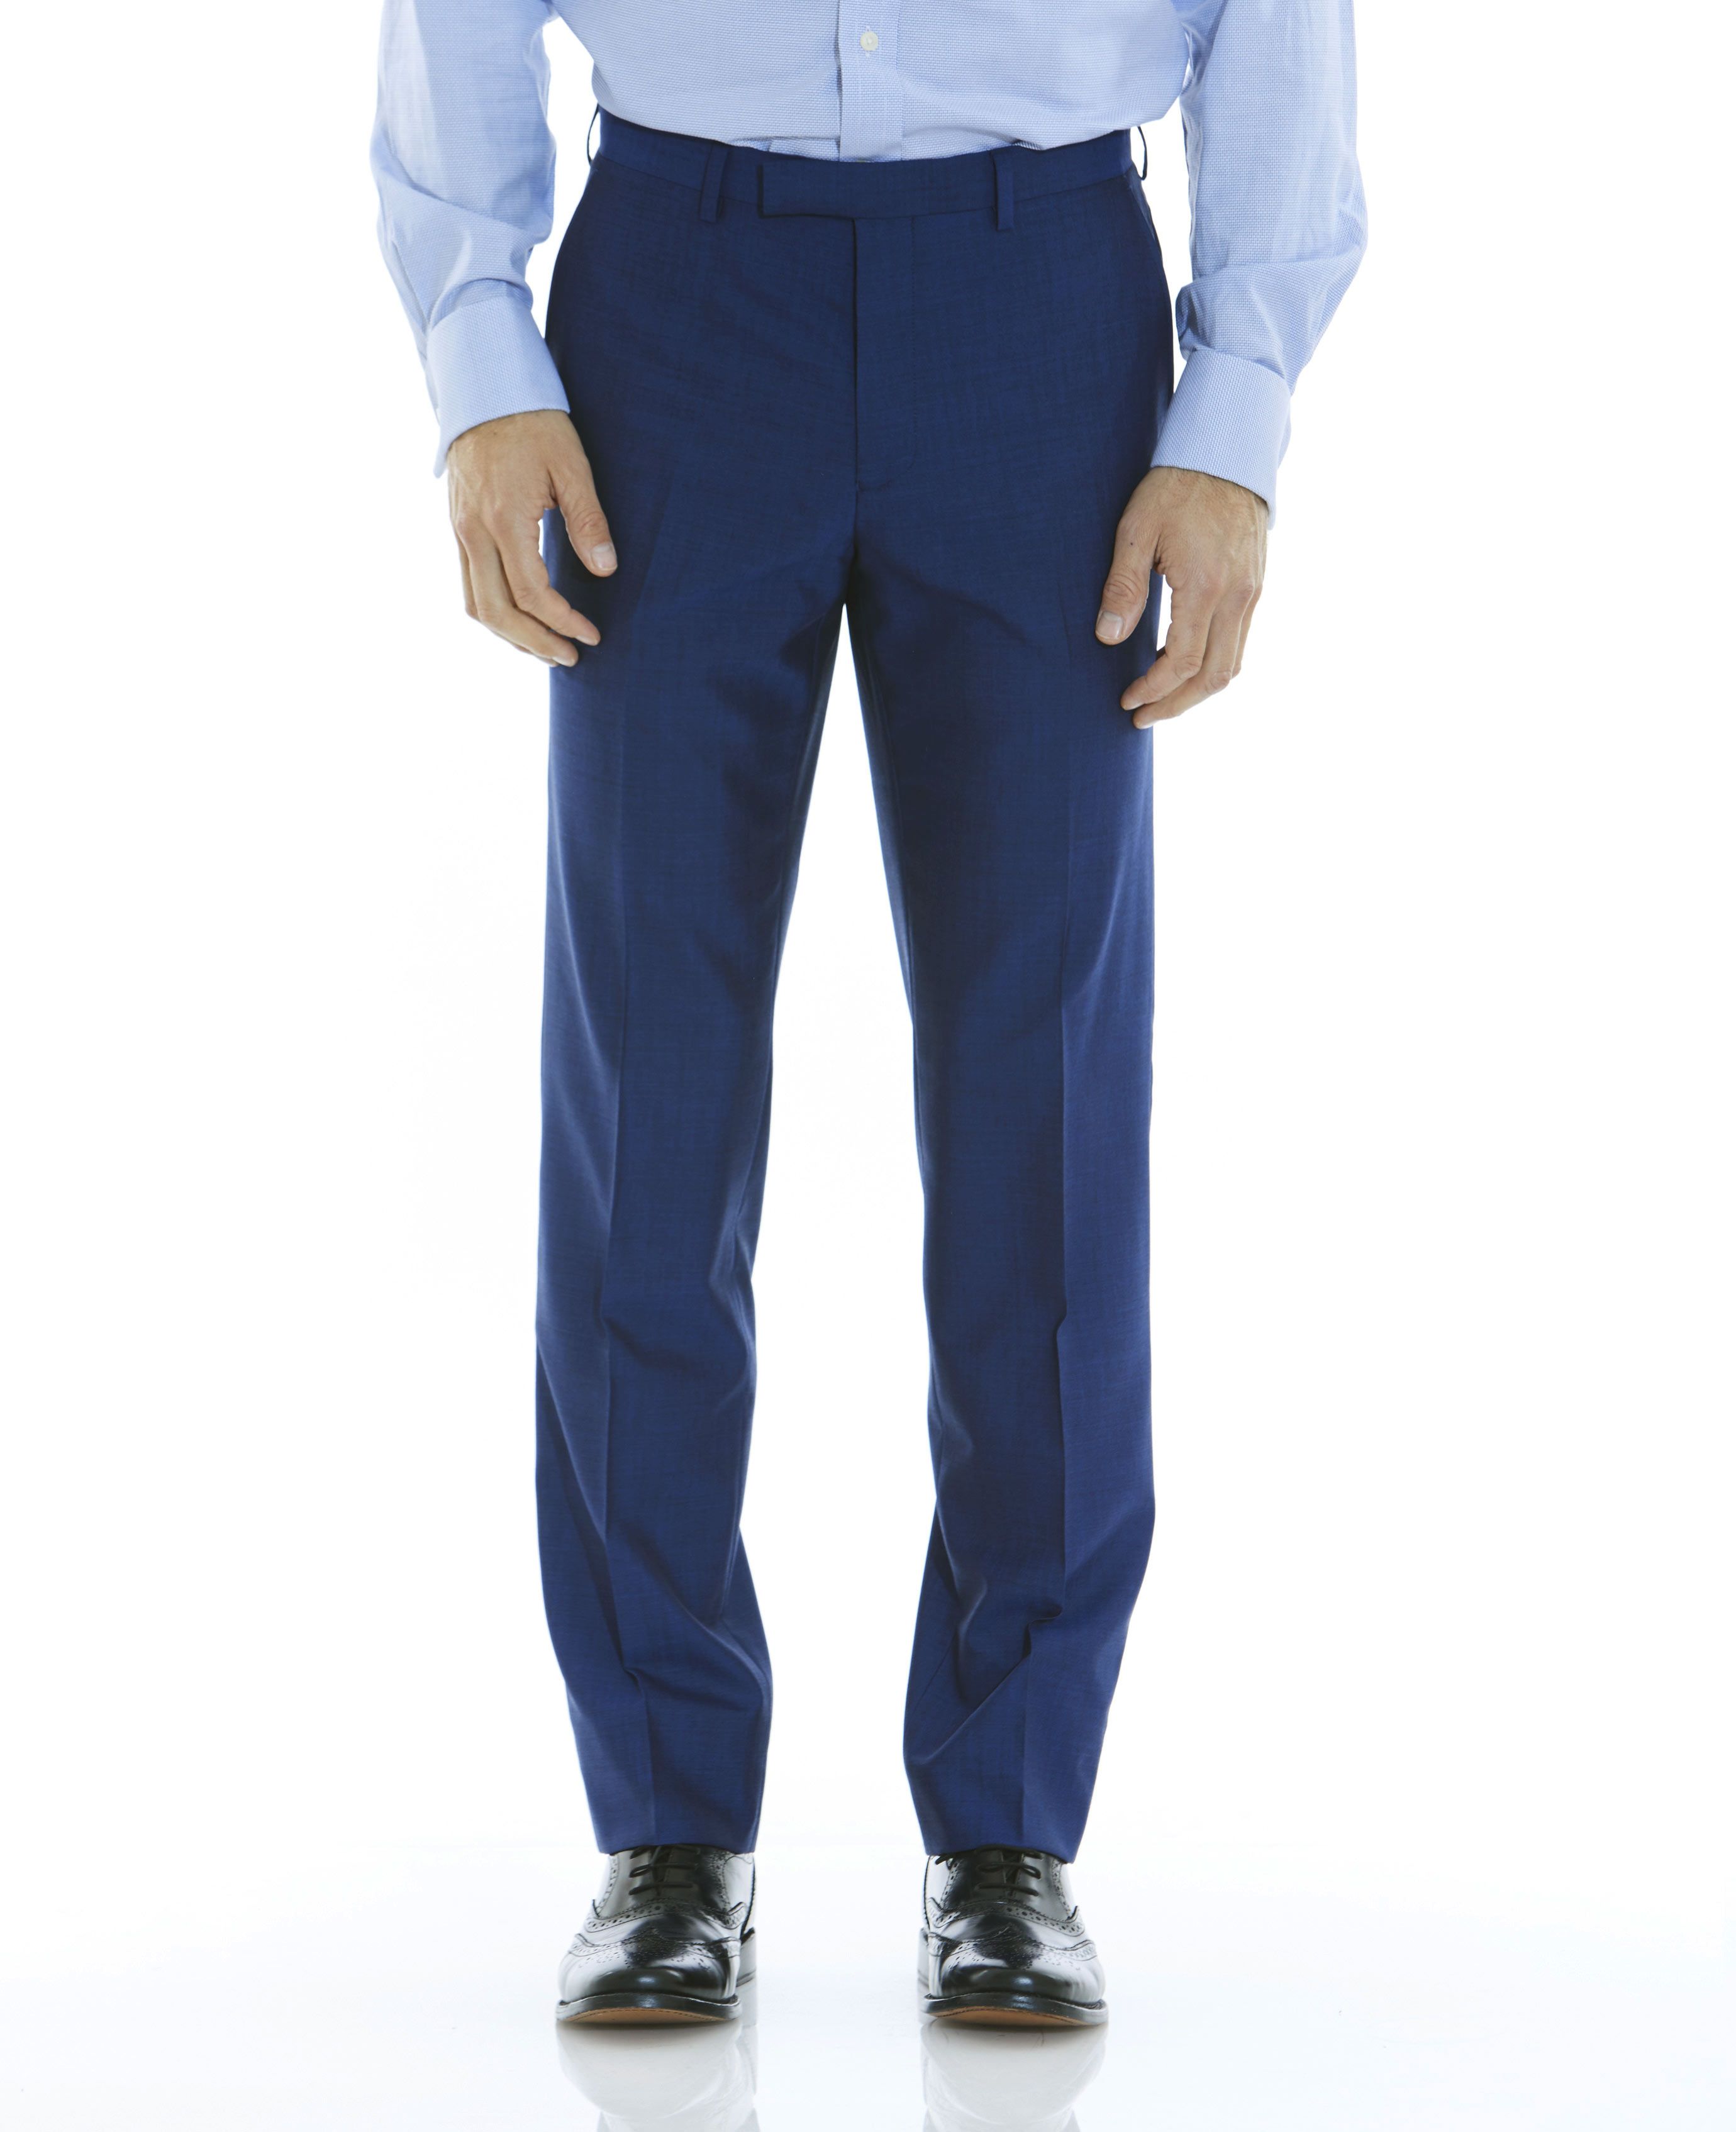 Italian Linen Madison Suit Pant in Naval Blue Pinstripe